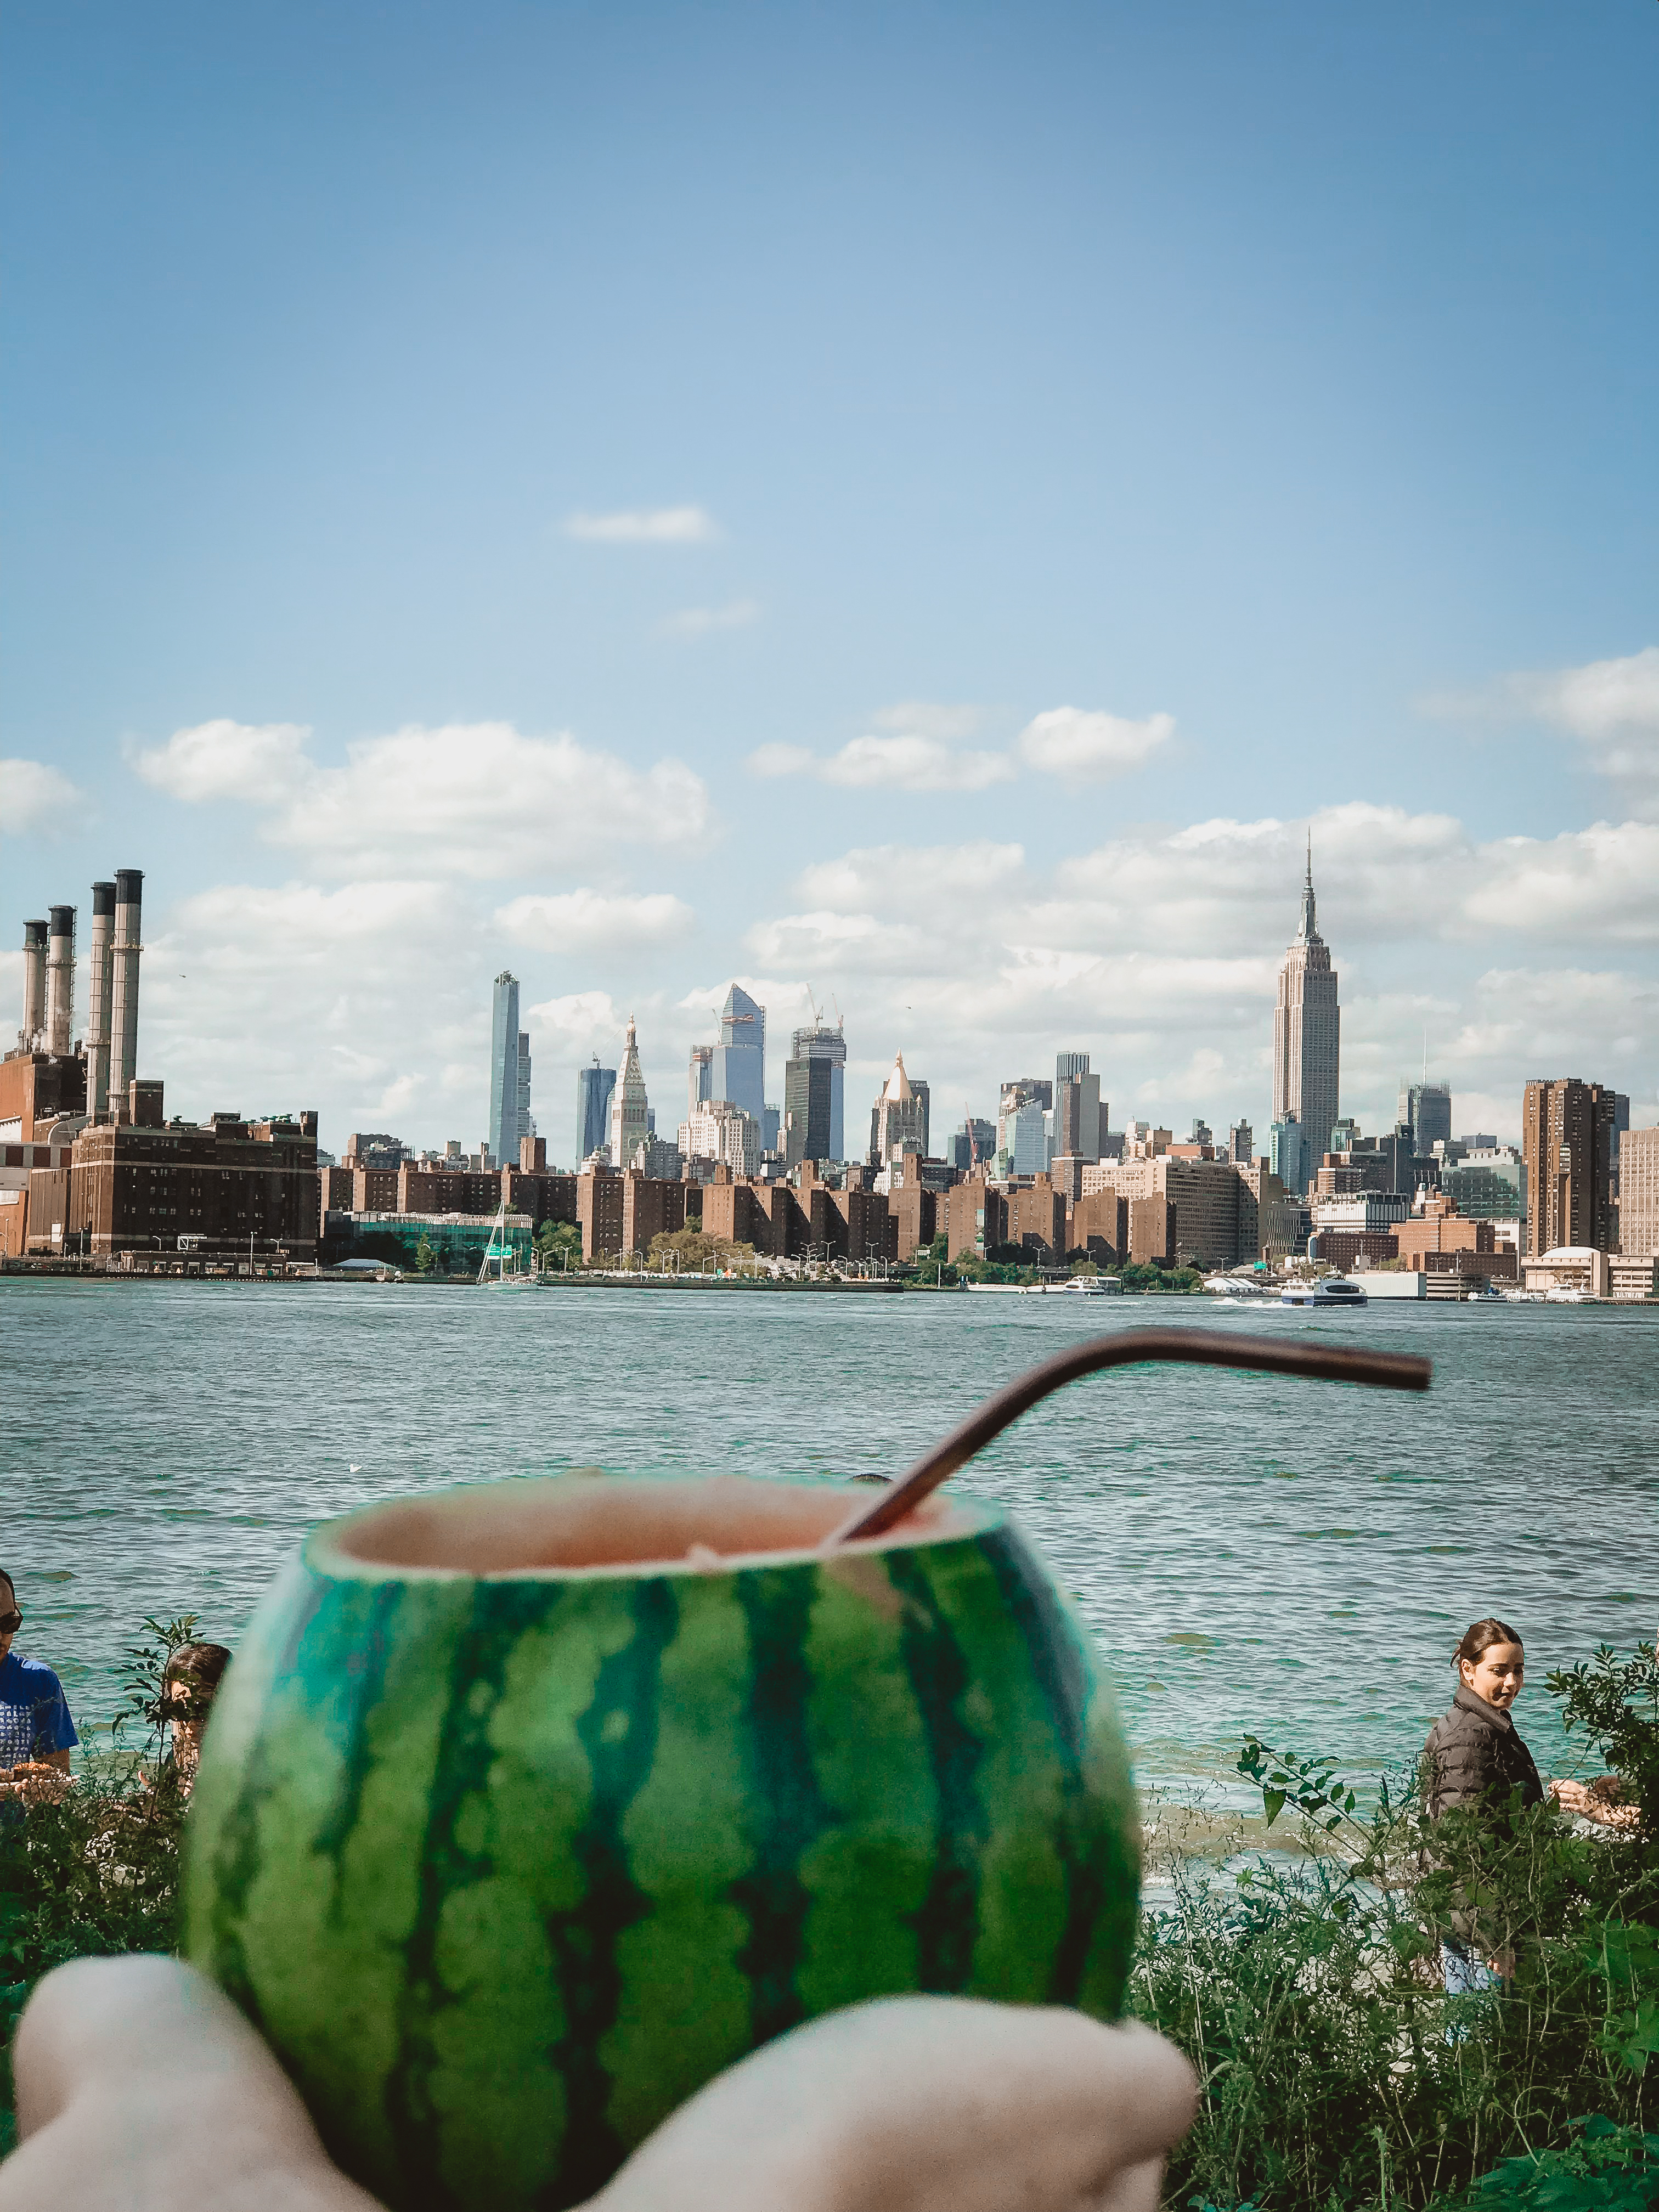 What To Do On A Fall Day in Williamsburg: Rooftop Bars and Smorgasburg Overthrow Boxing Brooklyn New York Mahattan travel guide SVADORE workout Saturday weekend smorgasburg the hoxton the wythe summerly klein william vale rooftop bars ferry 